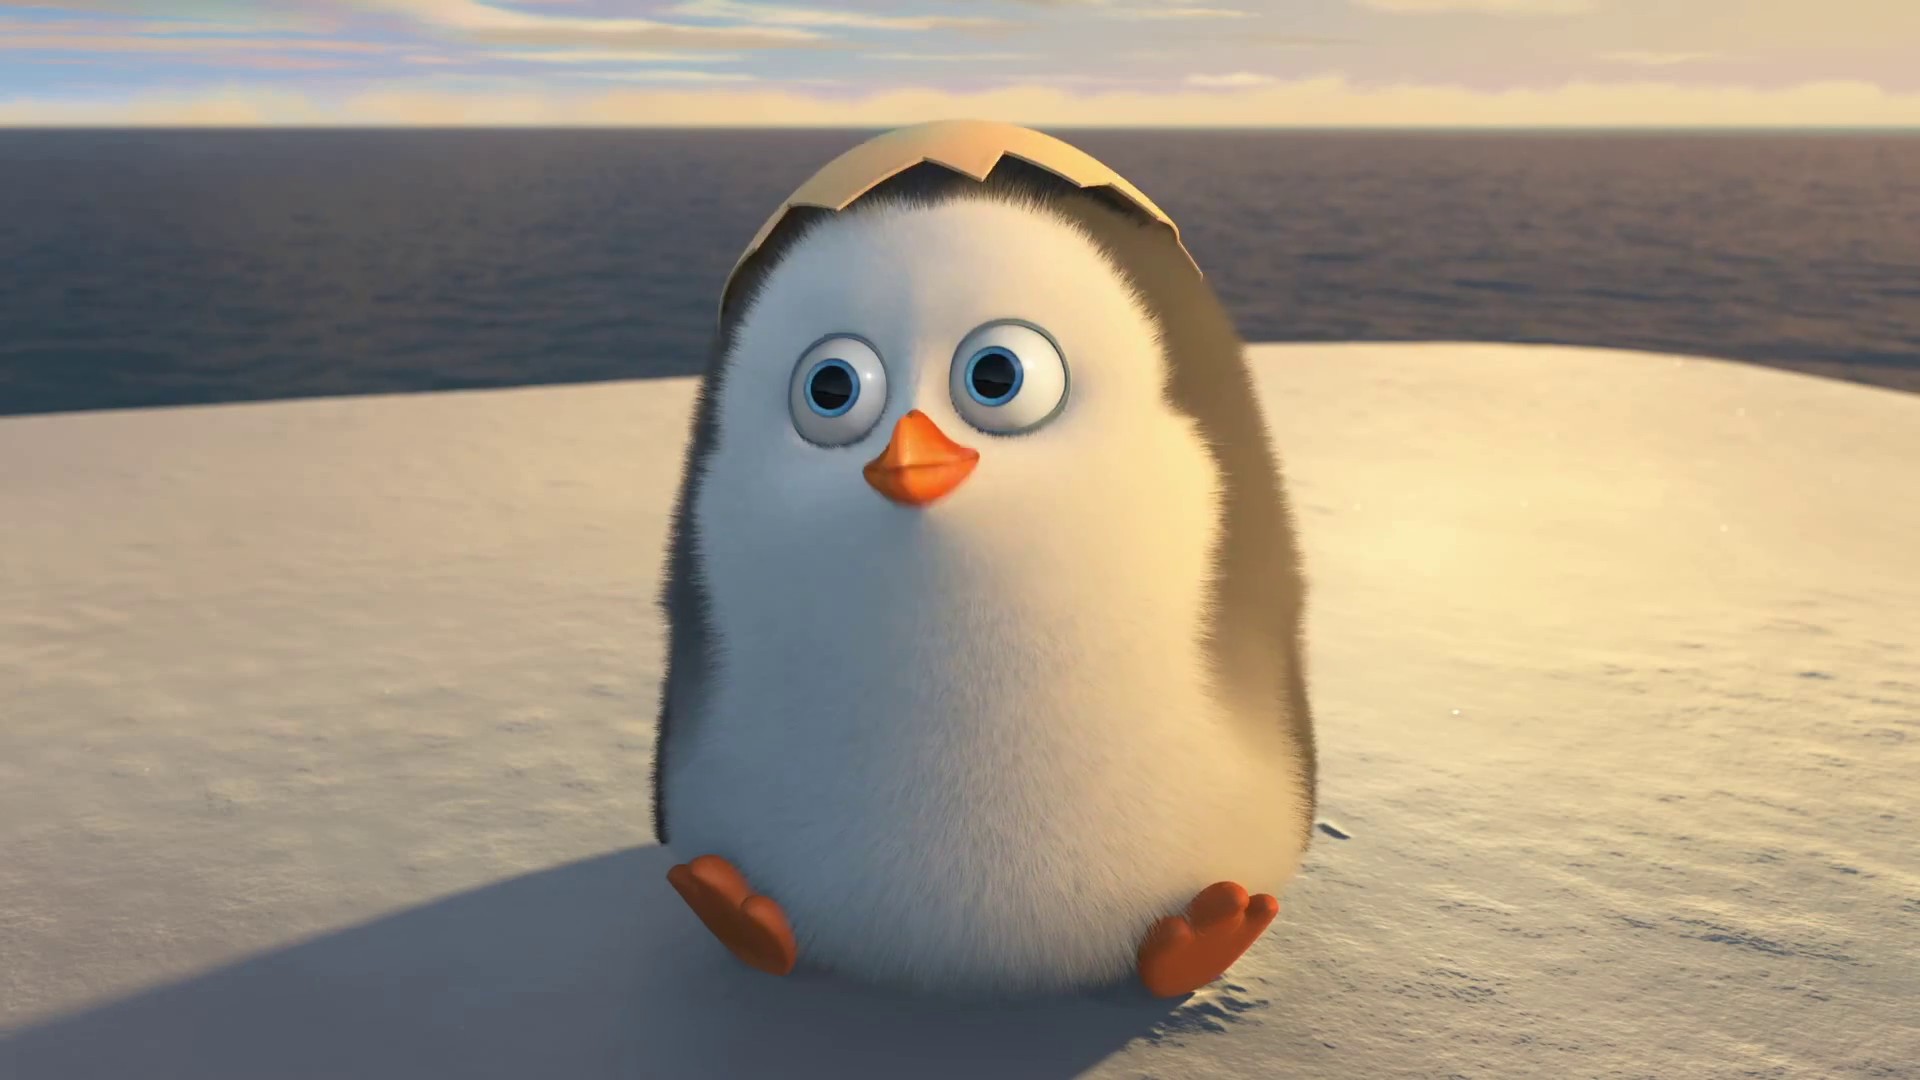 The Penguins of Madagascar Movie 2014 Cute Baby Penguin Wallpaper 1920x1080